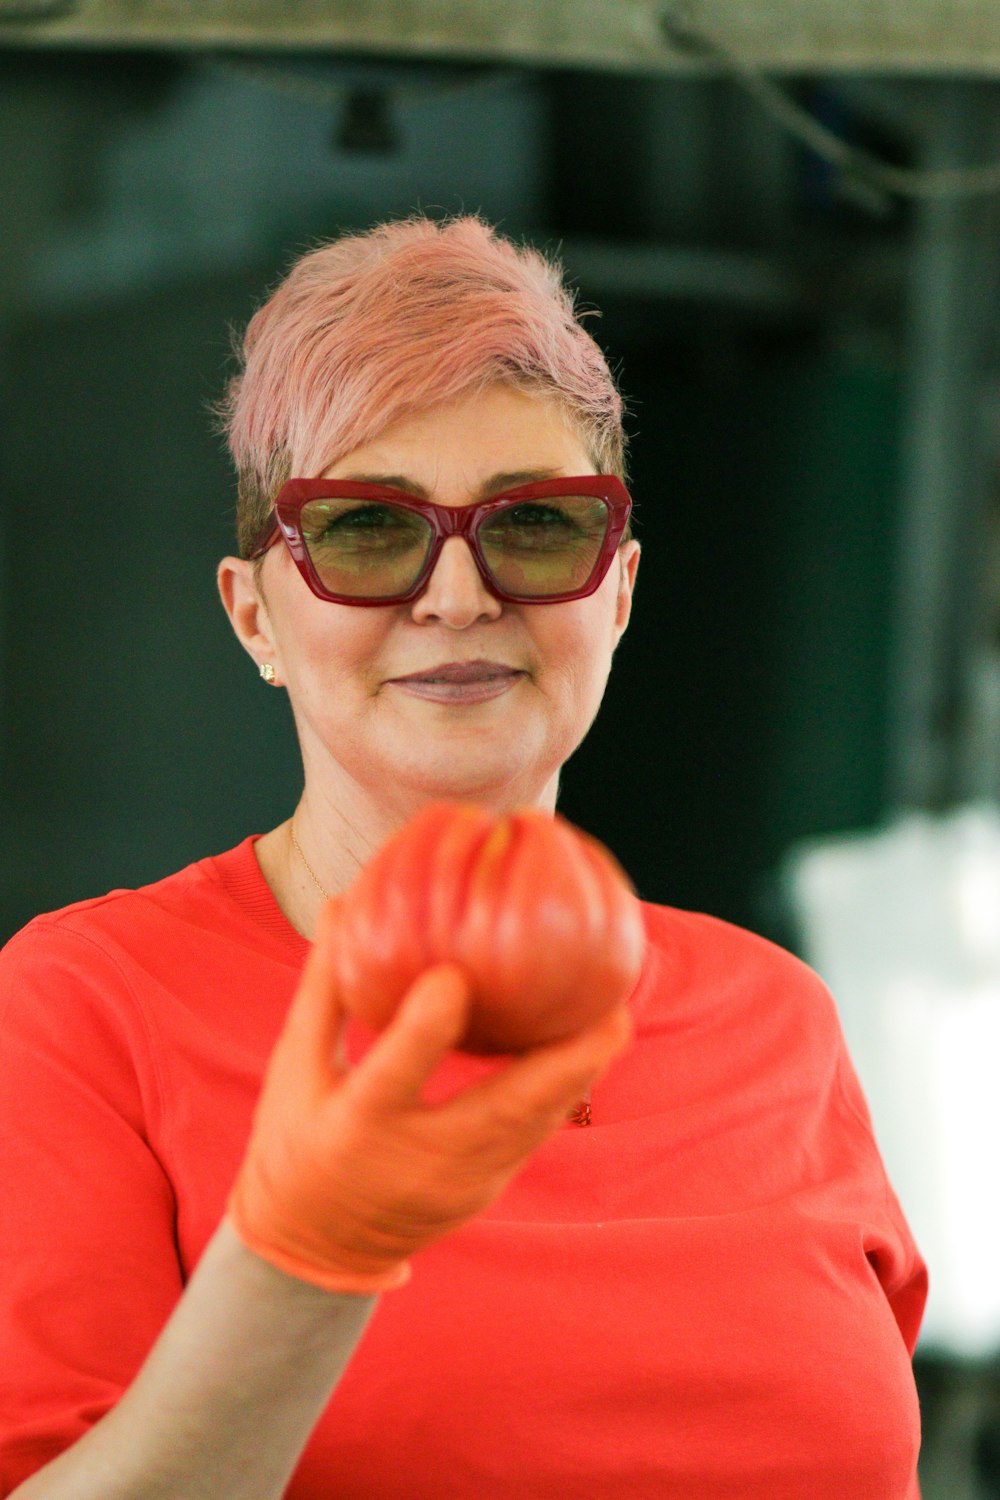 a woman in a red shirt holding a tomato